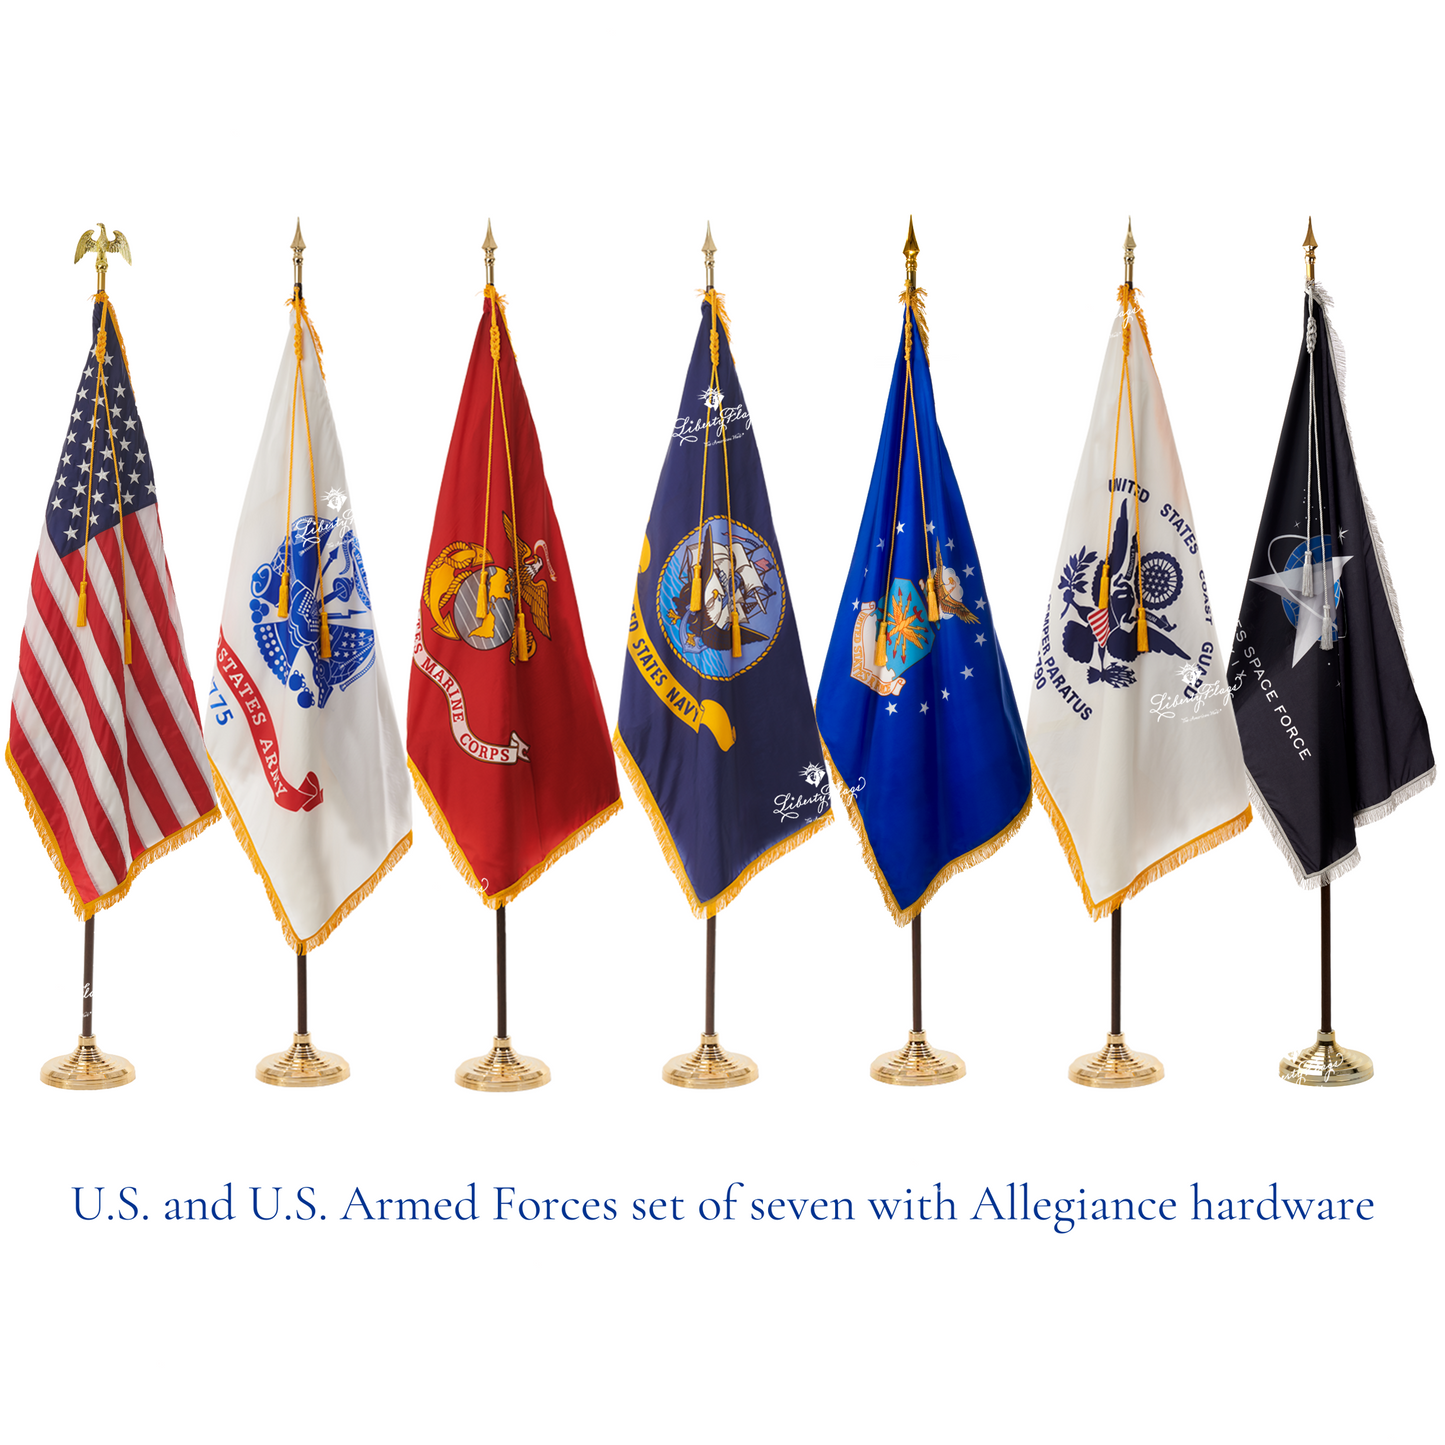 United States and U.S. Military Ceremonial Flags & Display Sets - Set of 7